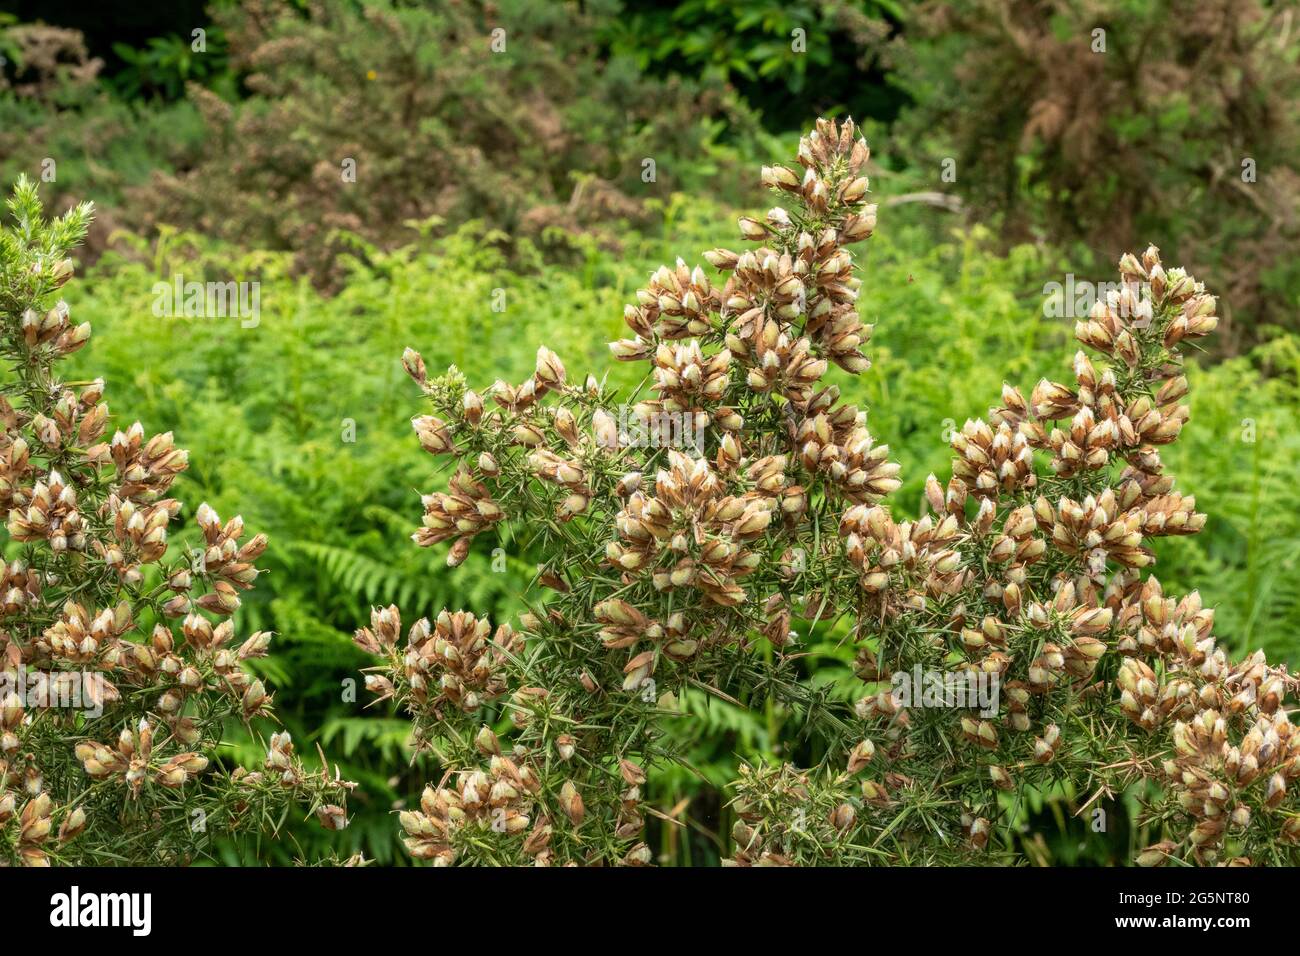 Section of the top of a gorse bush in bud against a soft focus bracken background Stock Photo